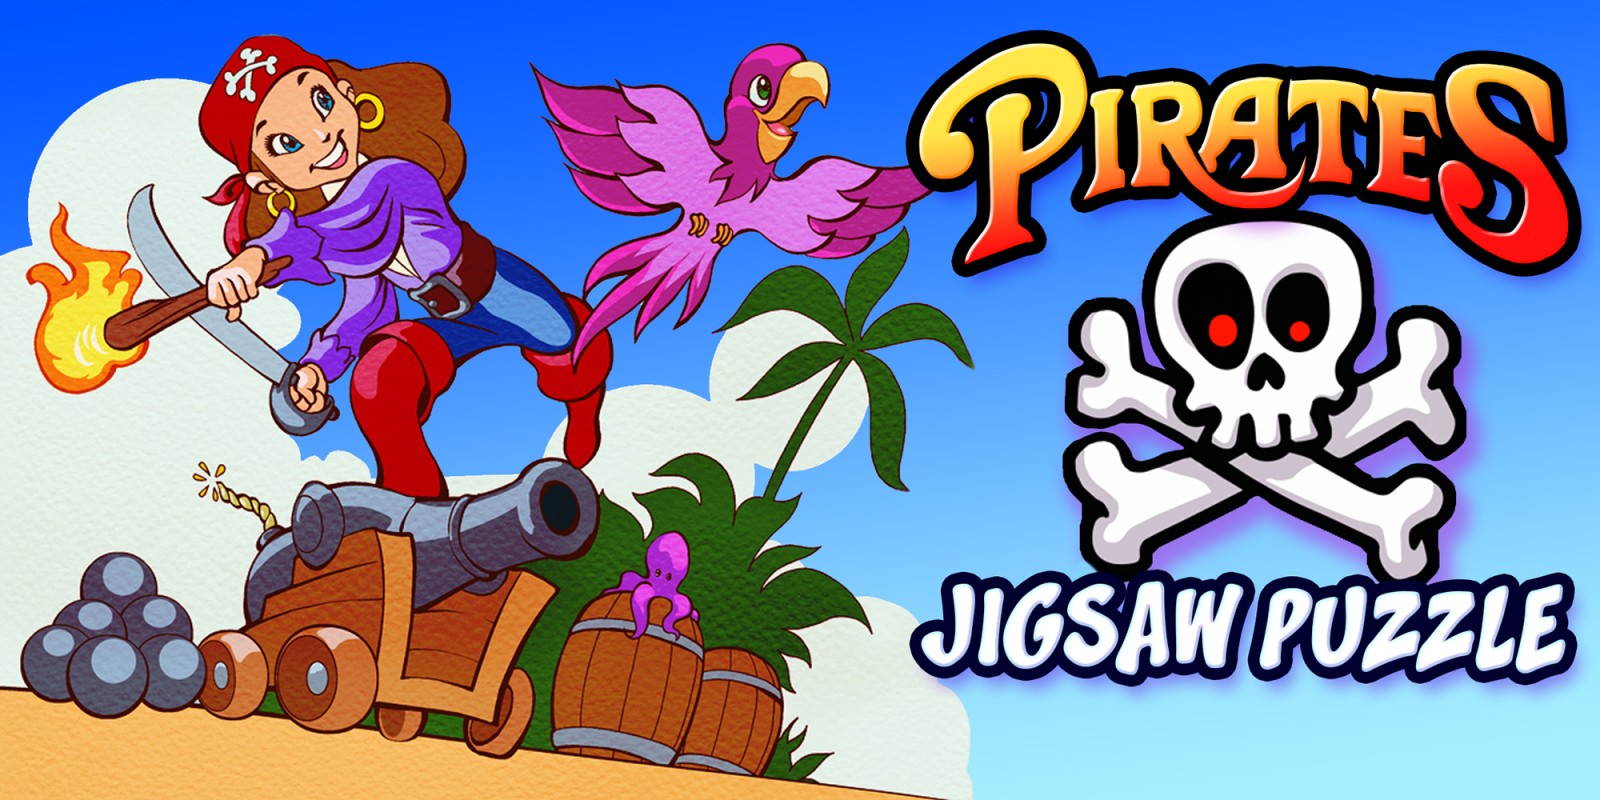 Pirates Jigsaw Puzzle - Education Adventure Learning Children Puzzles Games for Kids & Toddlers